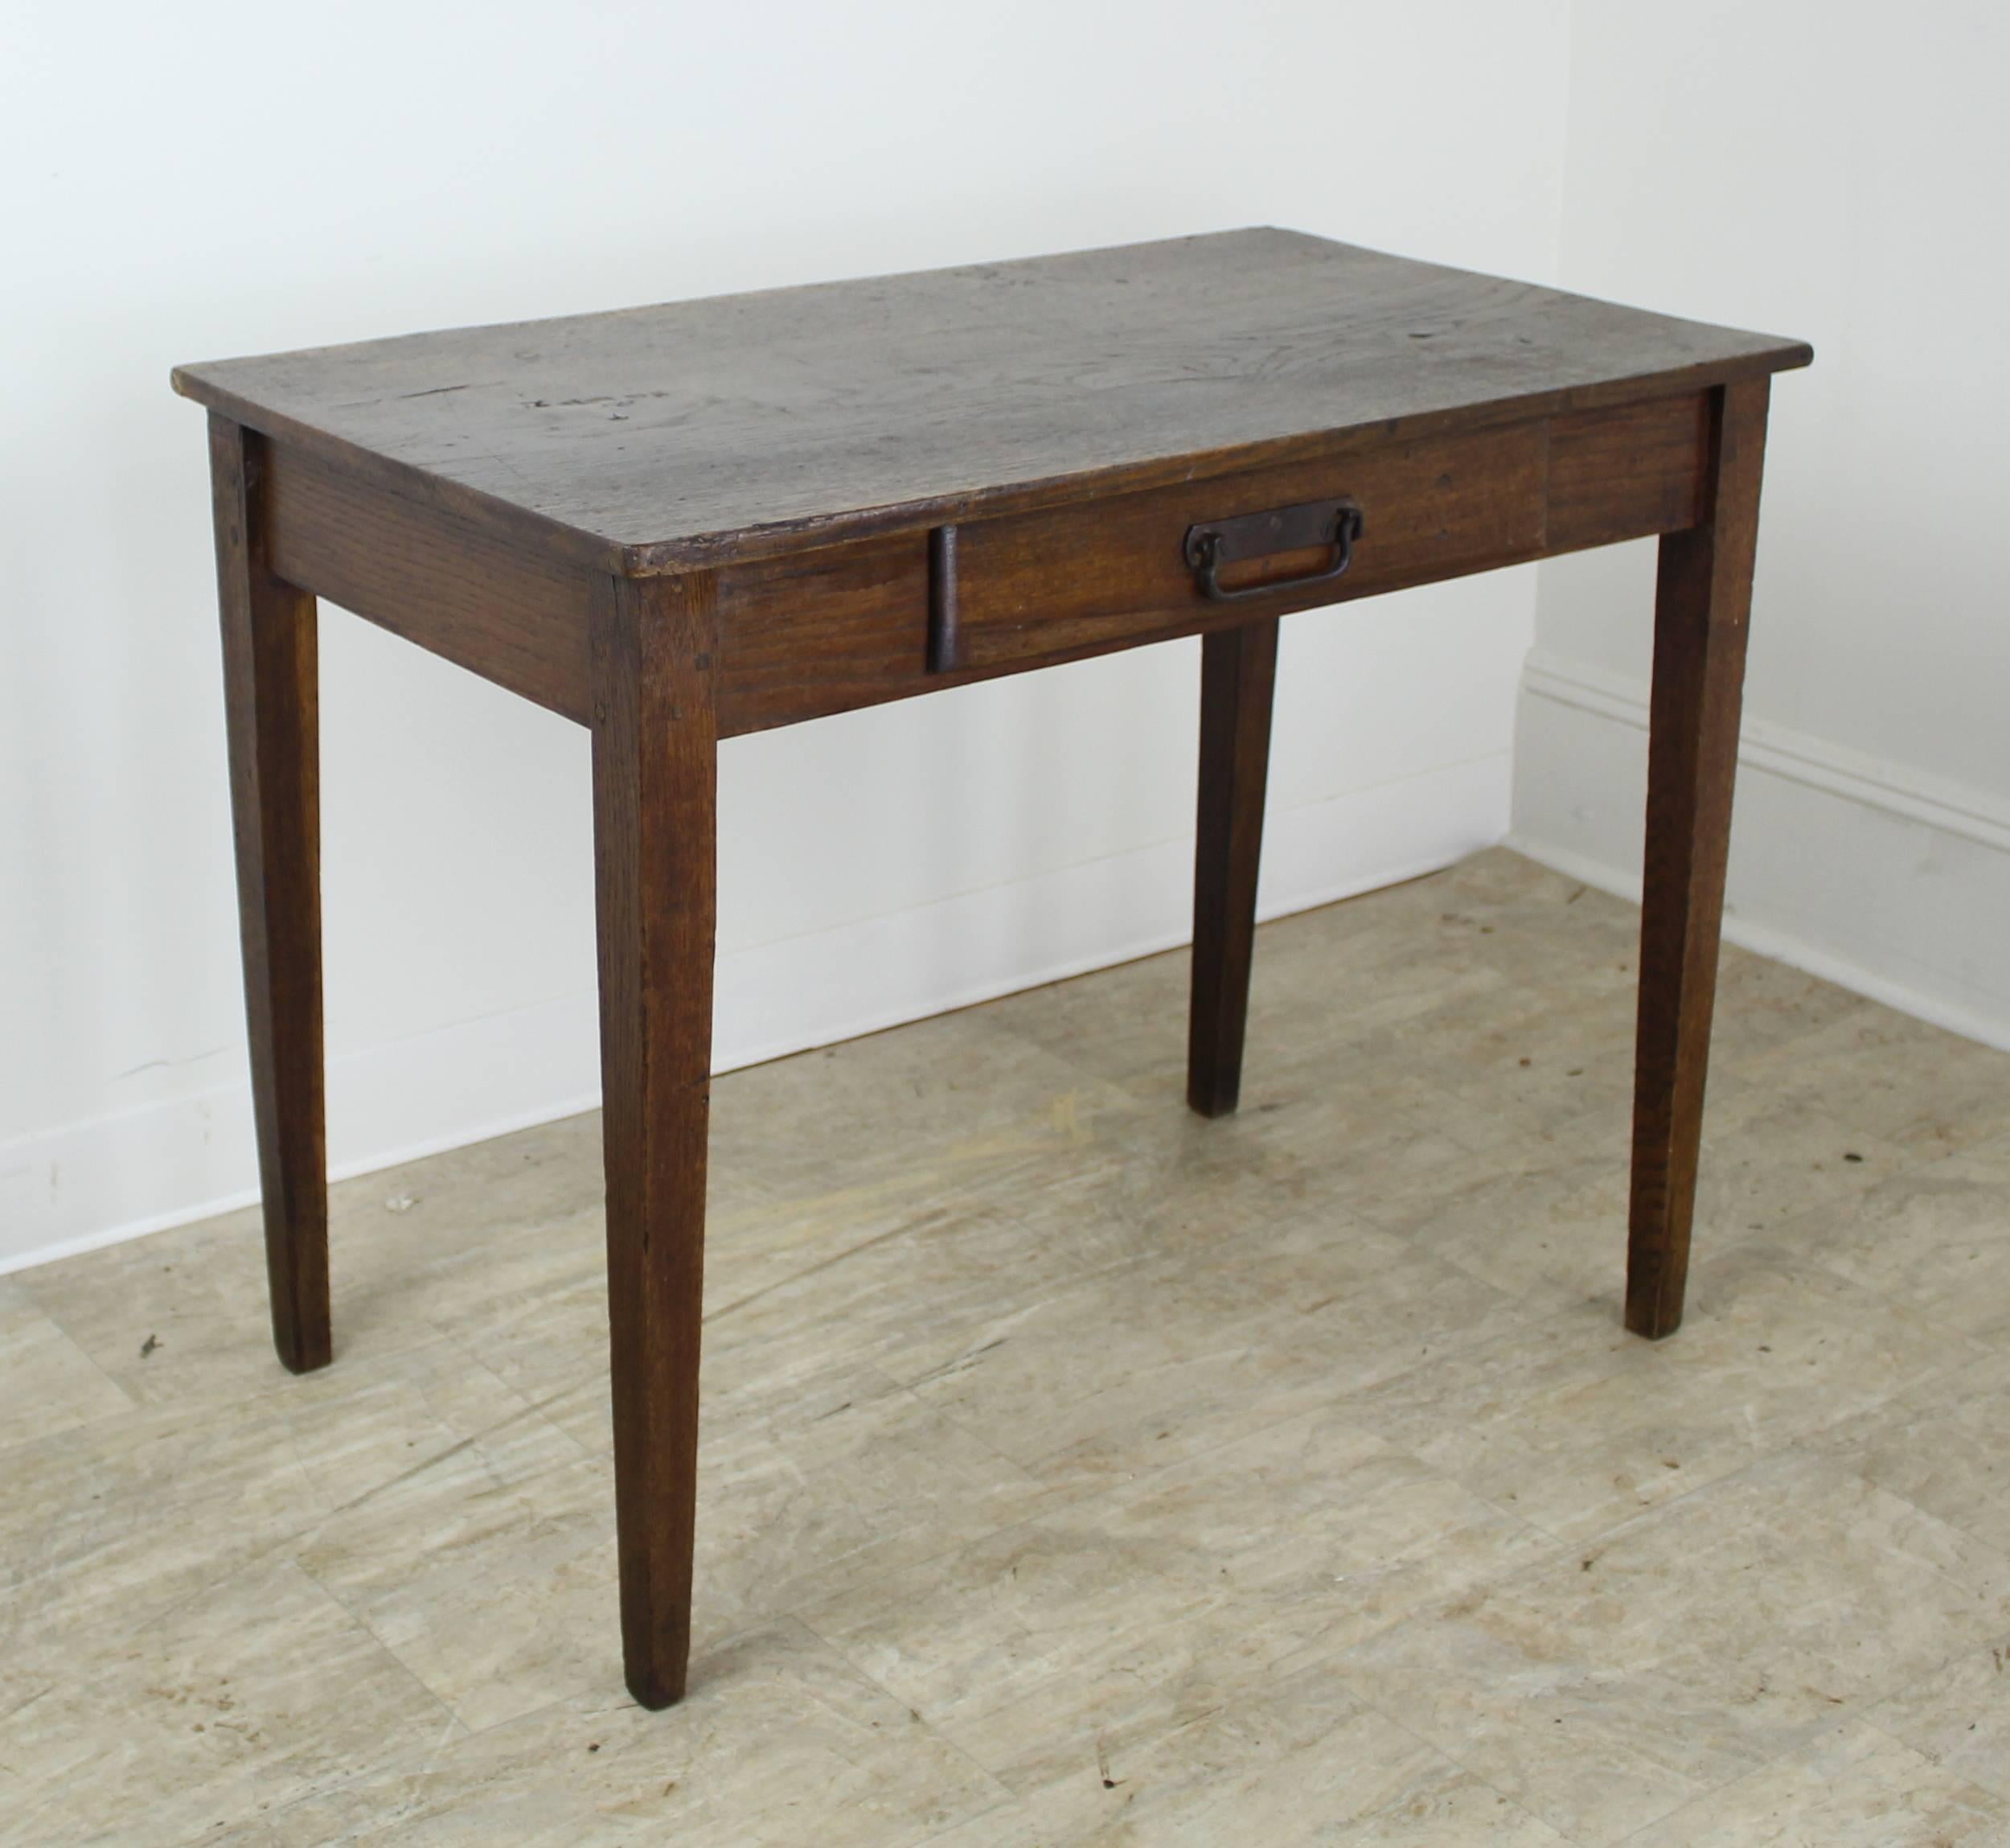 A handsome, slightly narrow dark oak side table fashioned from a single plank, complete with nice grain, rich color and fine patina. Tapered legs and one centre drawer.